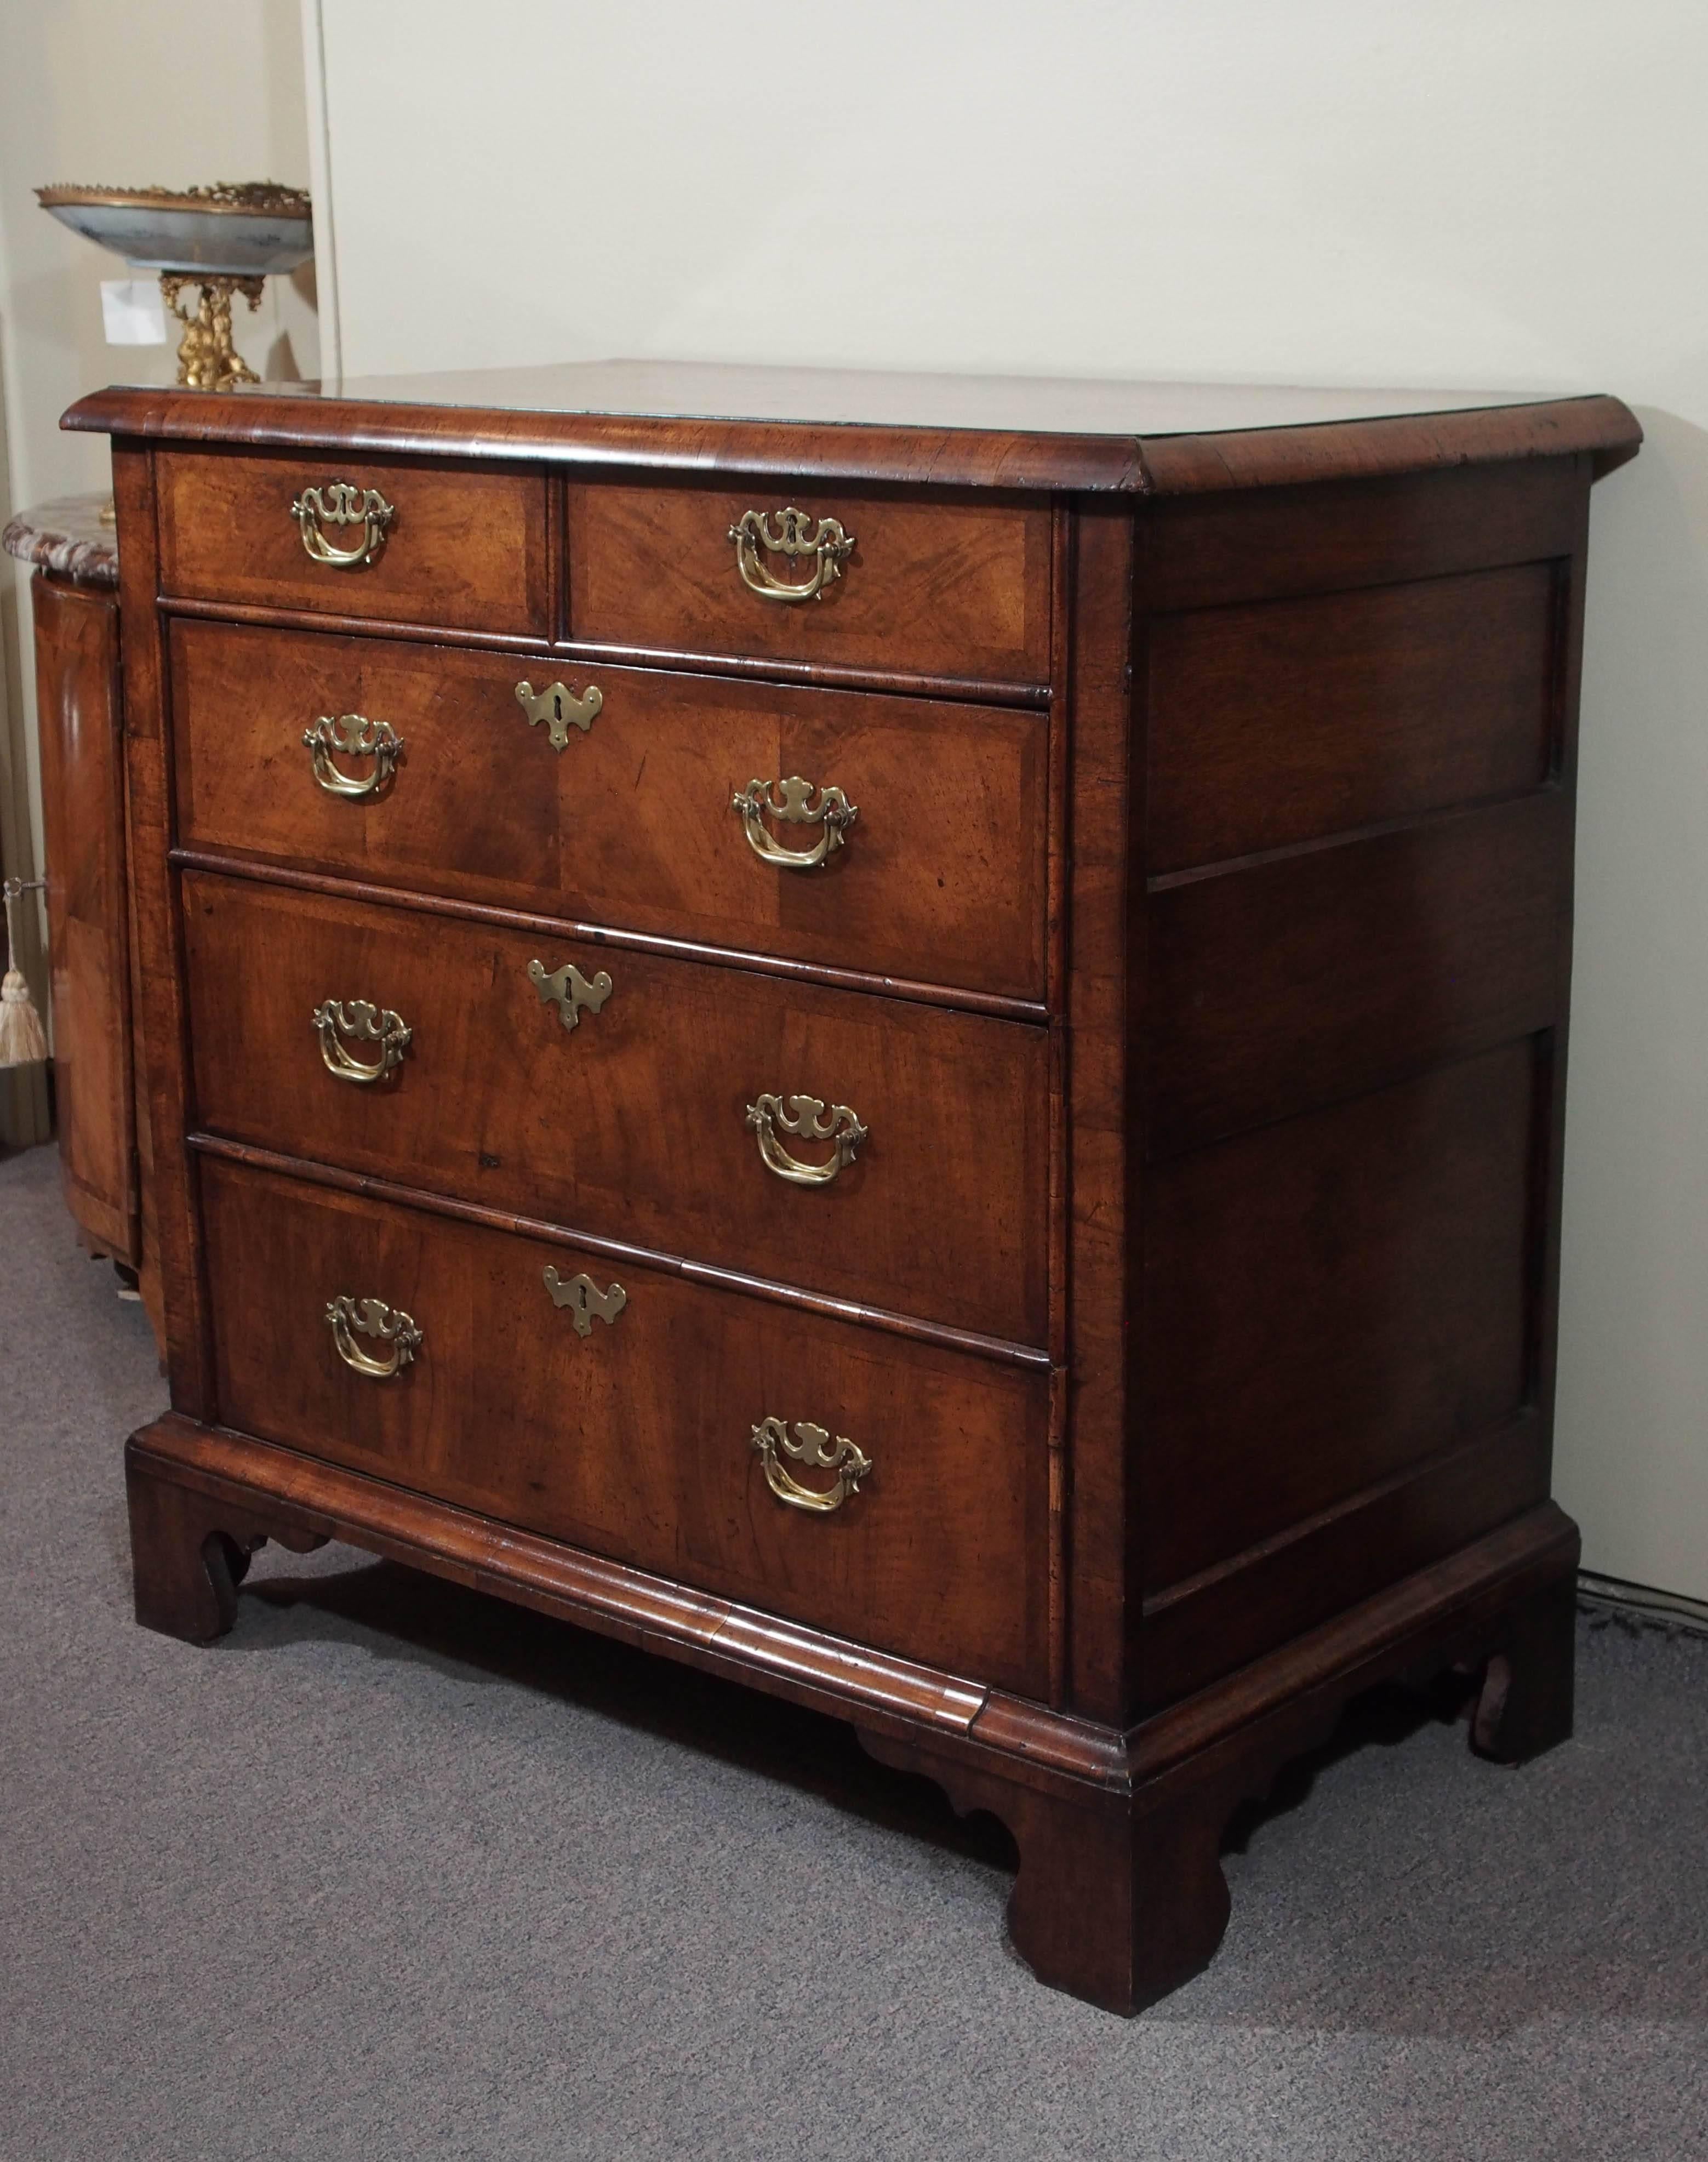 Antique English George I walnut chest of drawers, circa 1730. Fine patina. Oak and secondary woods.